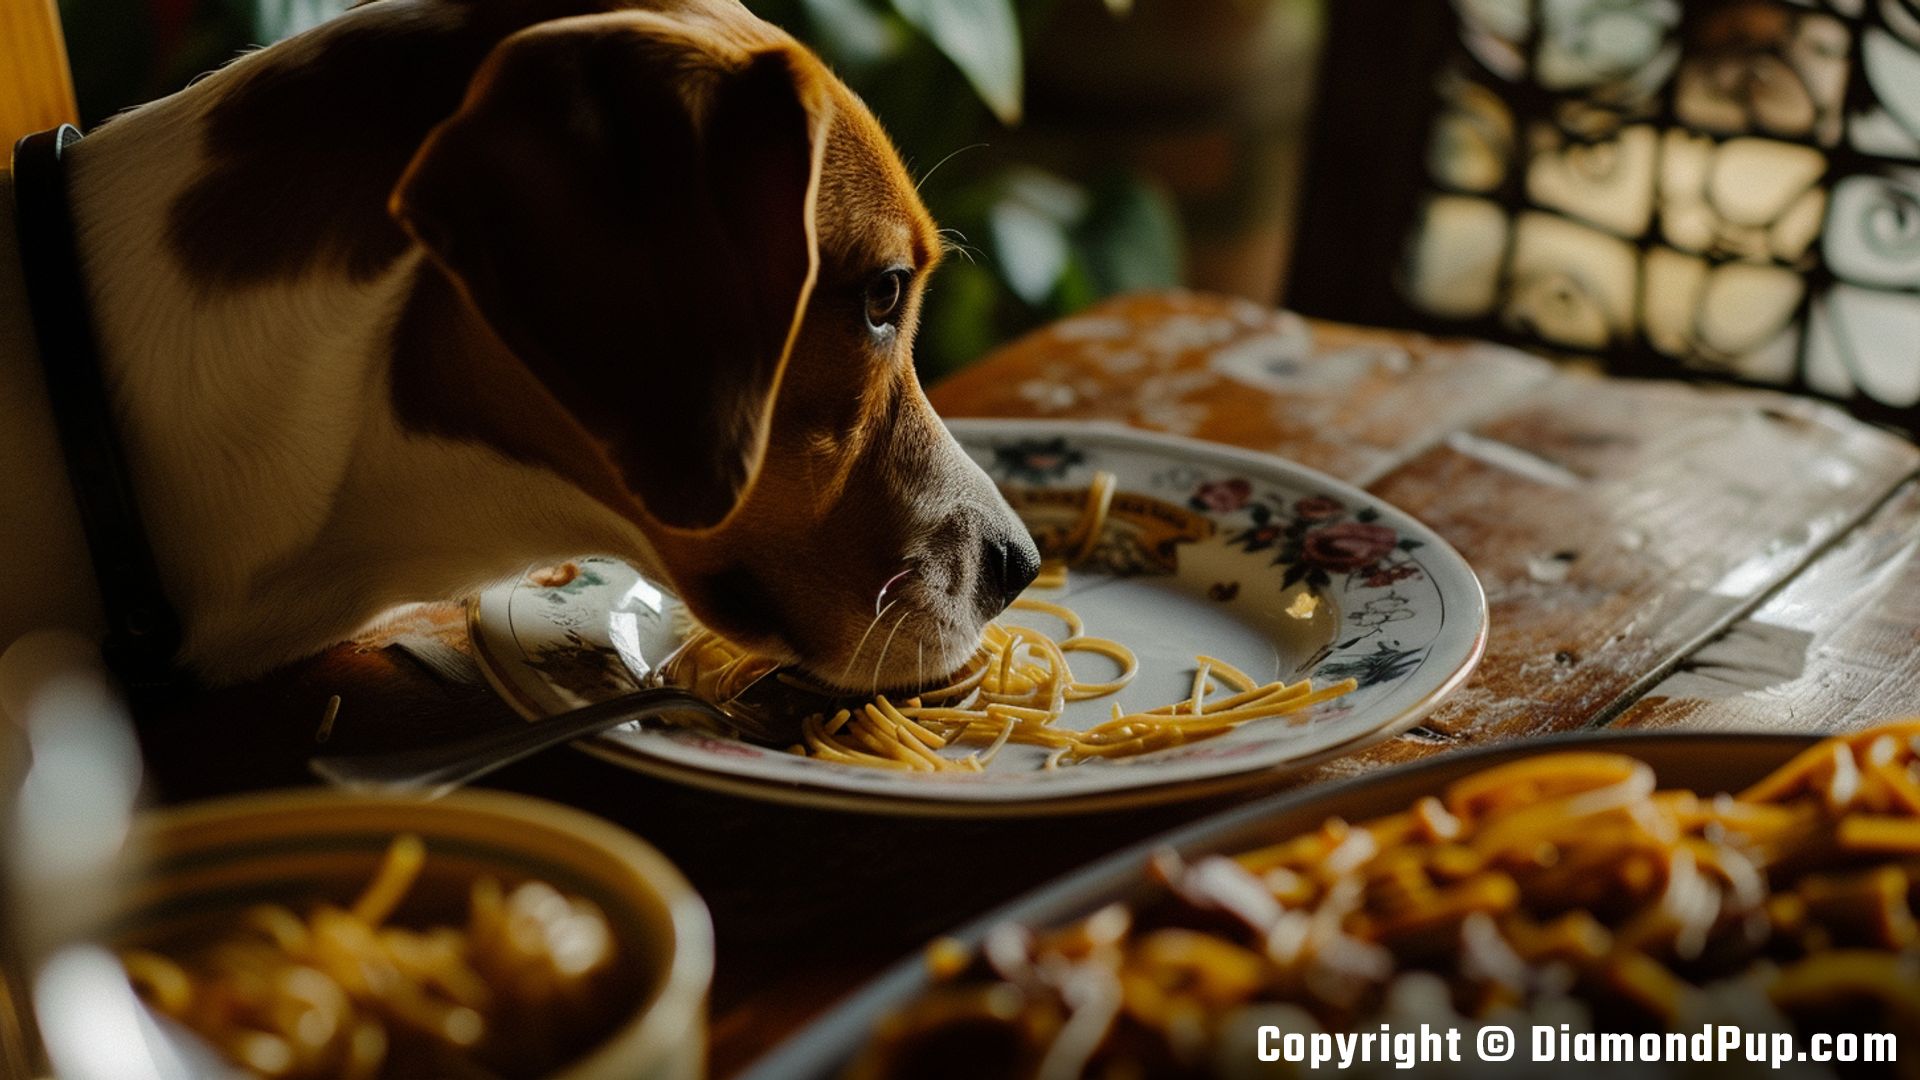 Photograph of a Playful Beagle Snacking on Pasta